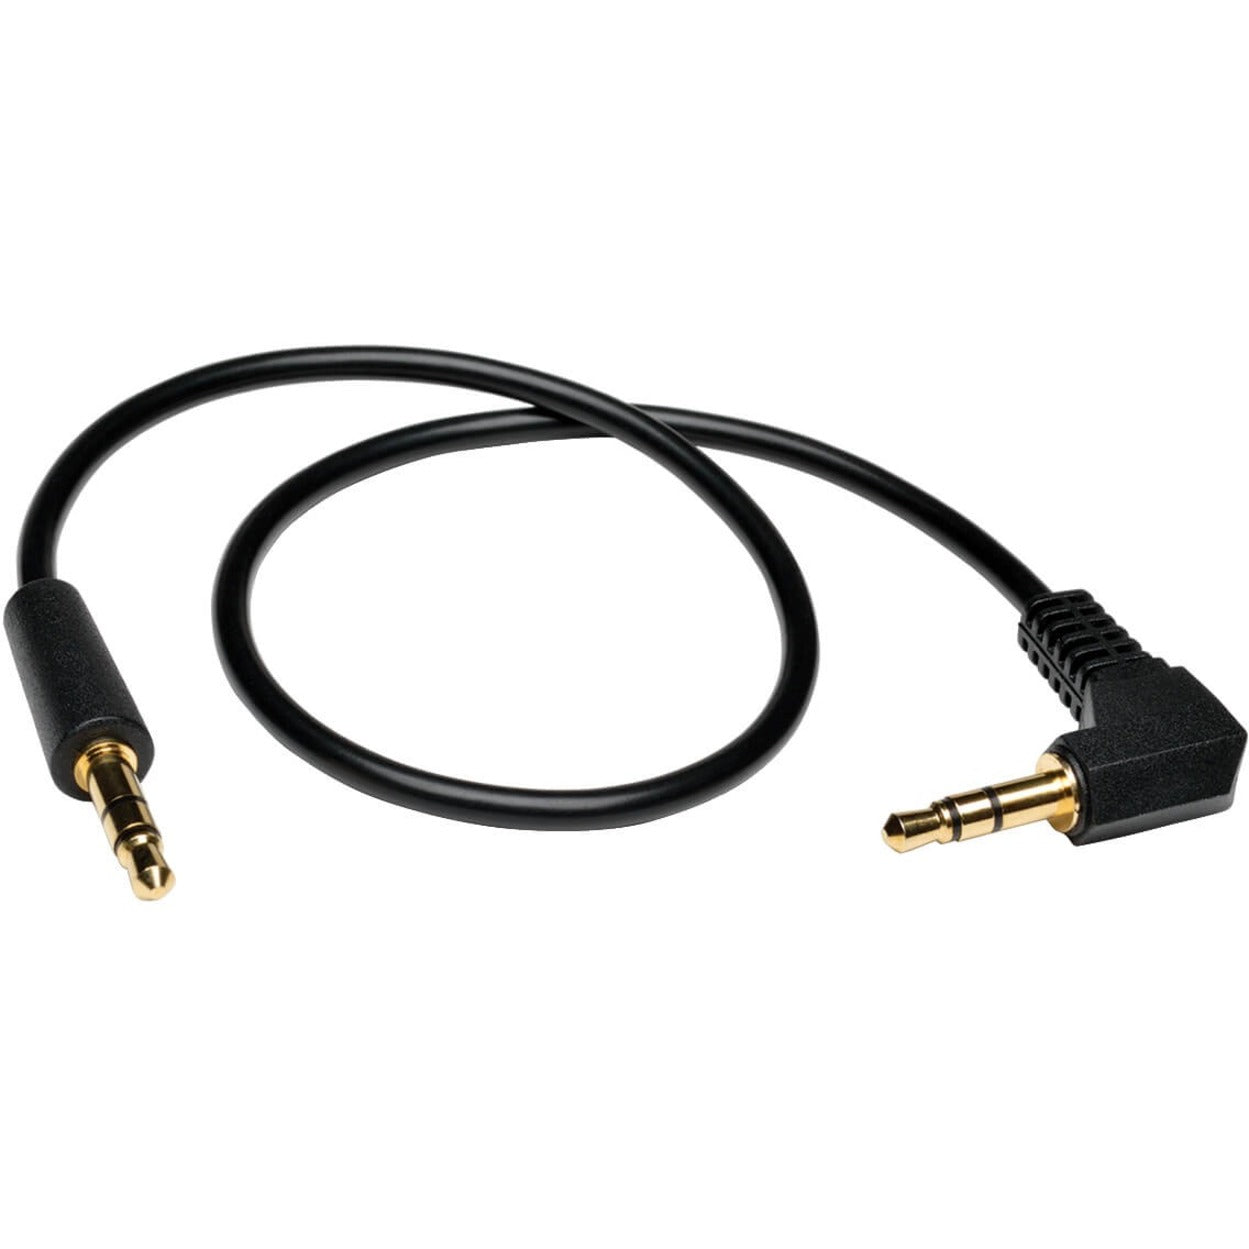 Tripp Lite P312-006-RA 3.5mm Mini Stereo Audio Cable with Right Angle Plug, 6-ft.